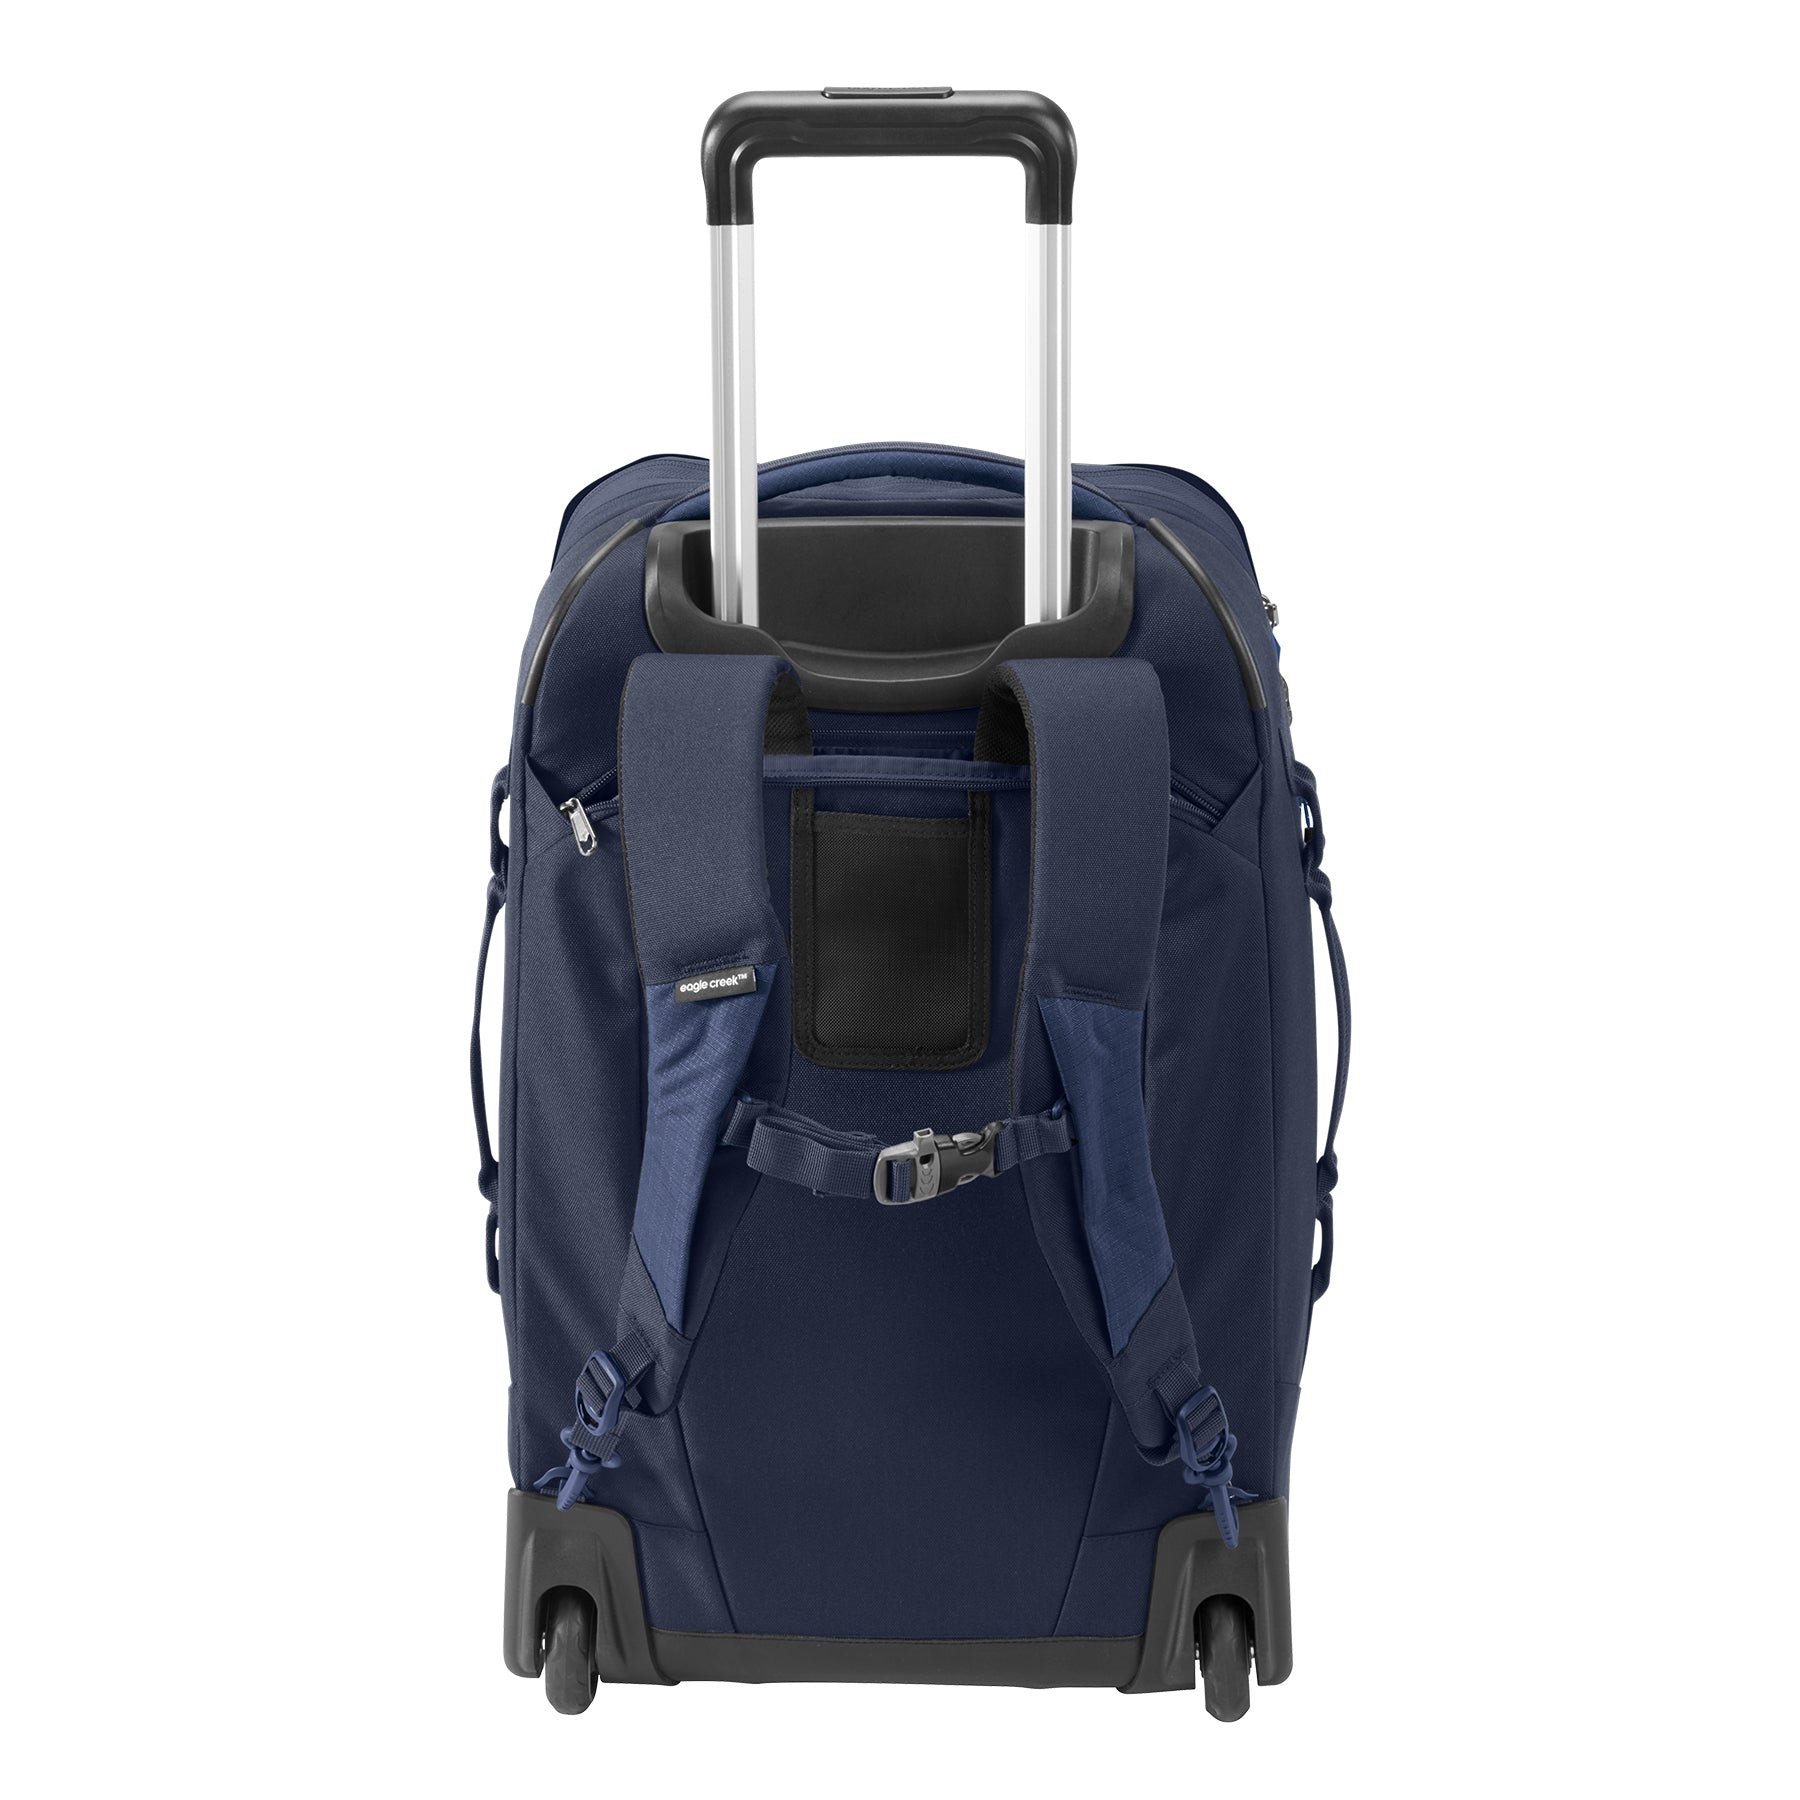 EXPANSE 2-WHEEL 21.25"/35L CONVERTIBLE INTERNATIONAL CARRY ON LUGGAGE